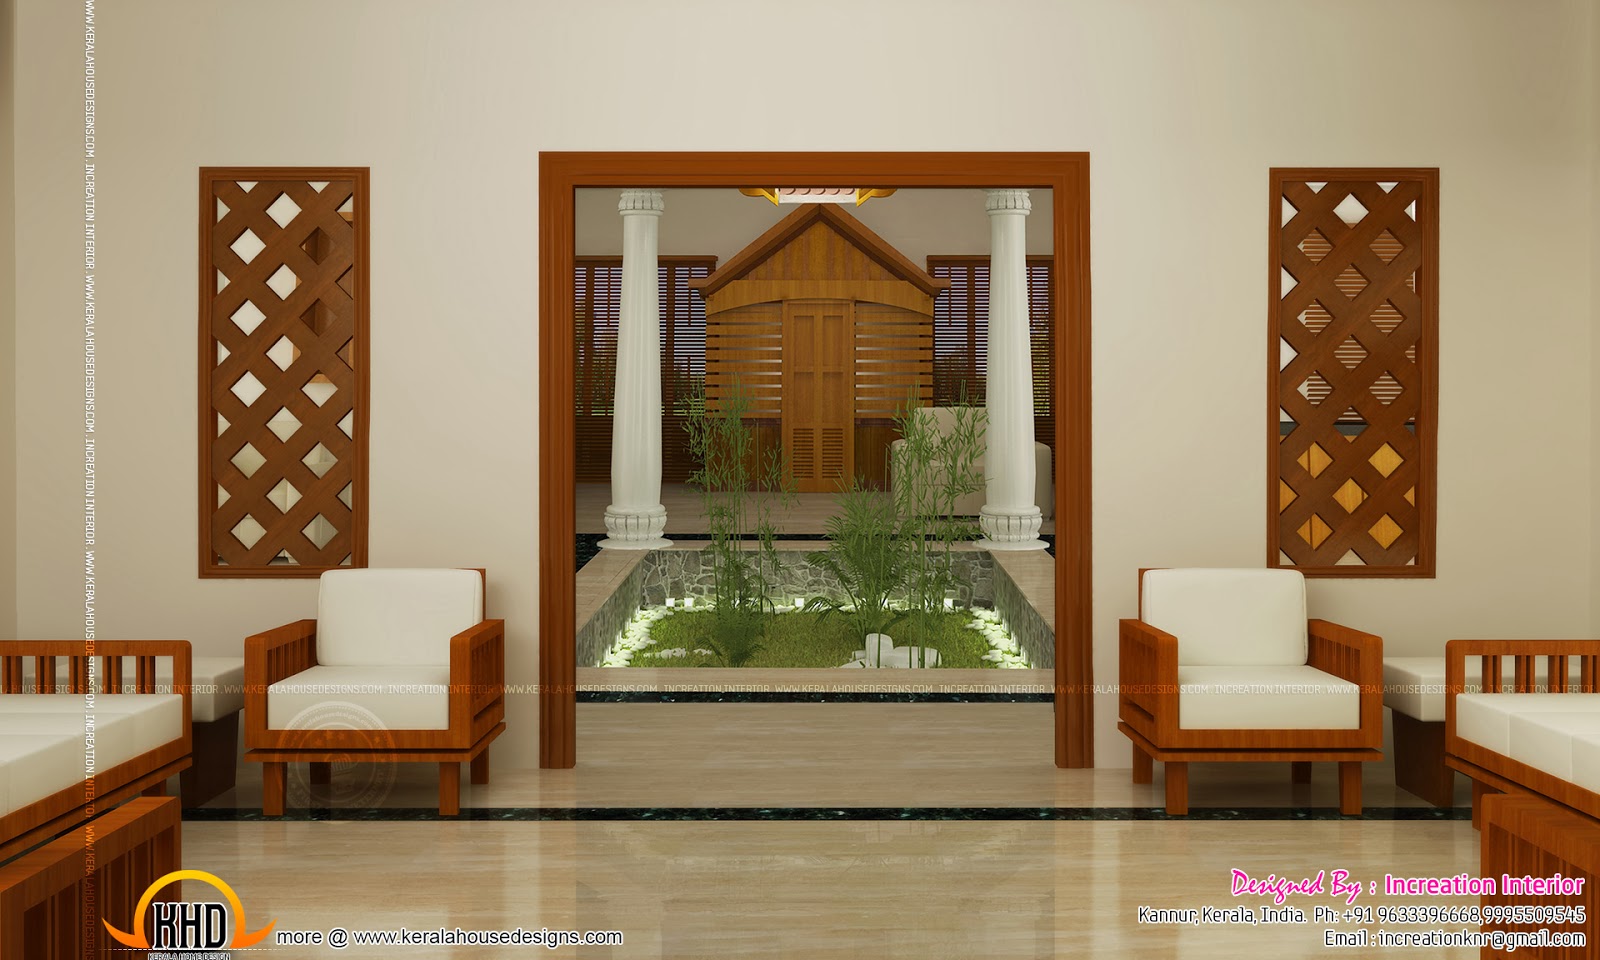 For more info about these interior designs, contact